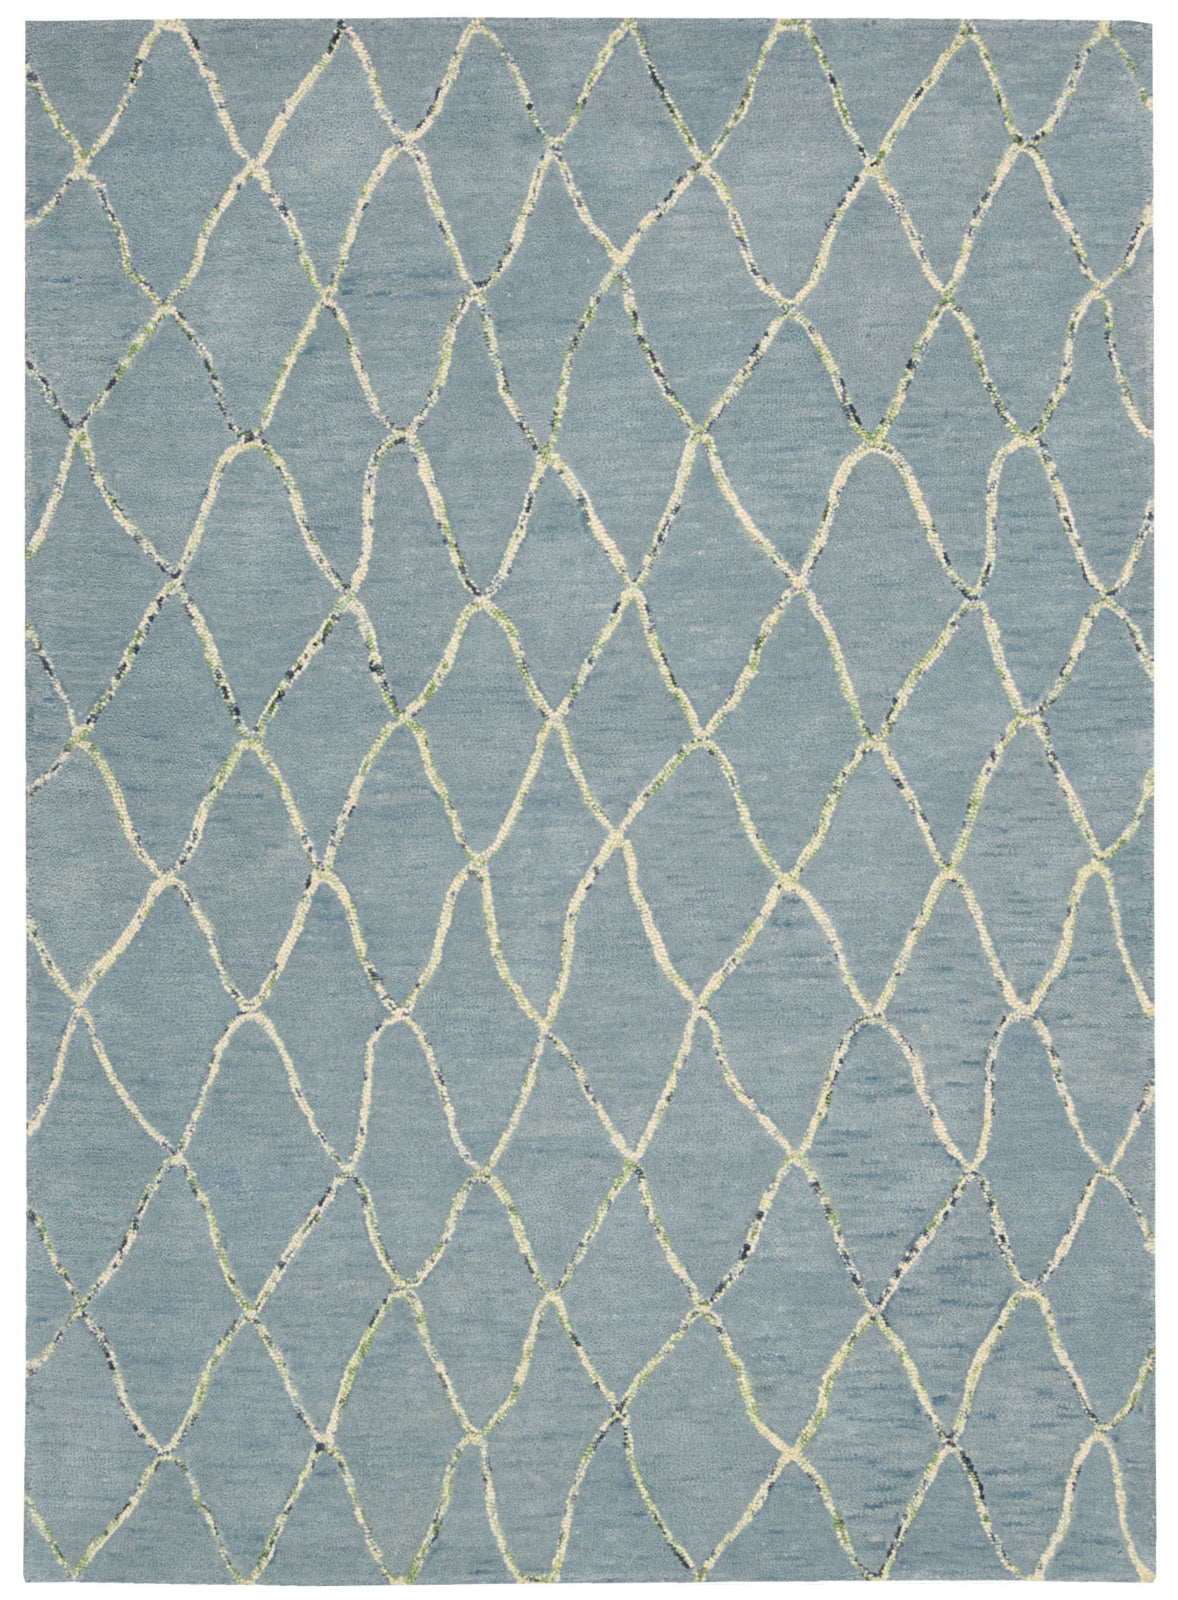 Nourison Intermix INT02 Wave Area Rug by Barclay Butera main image